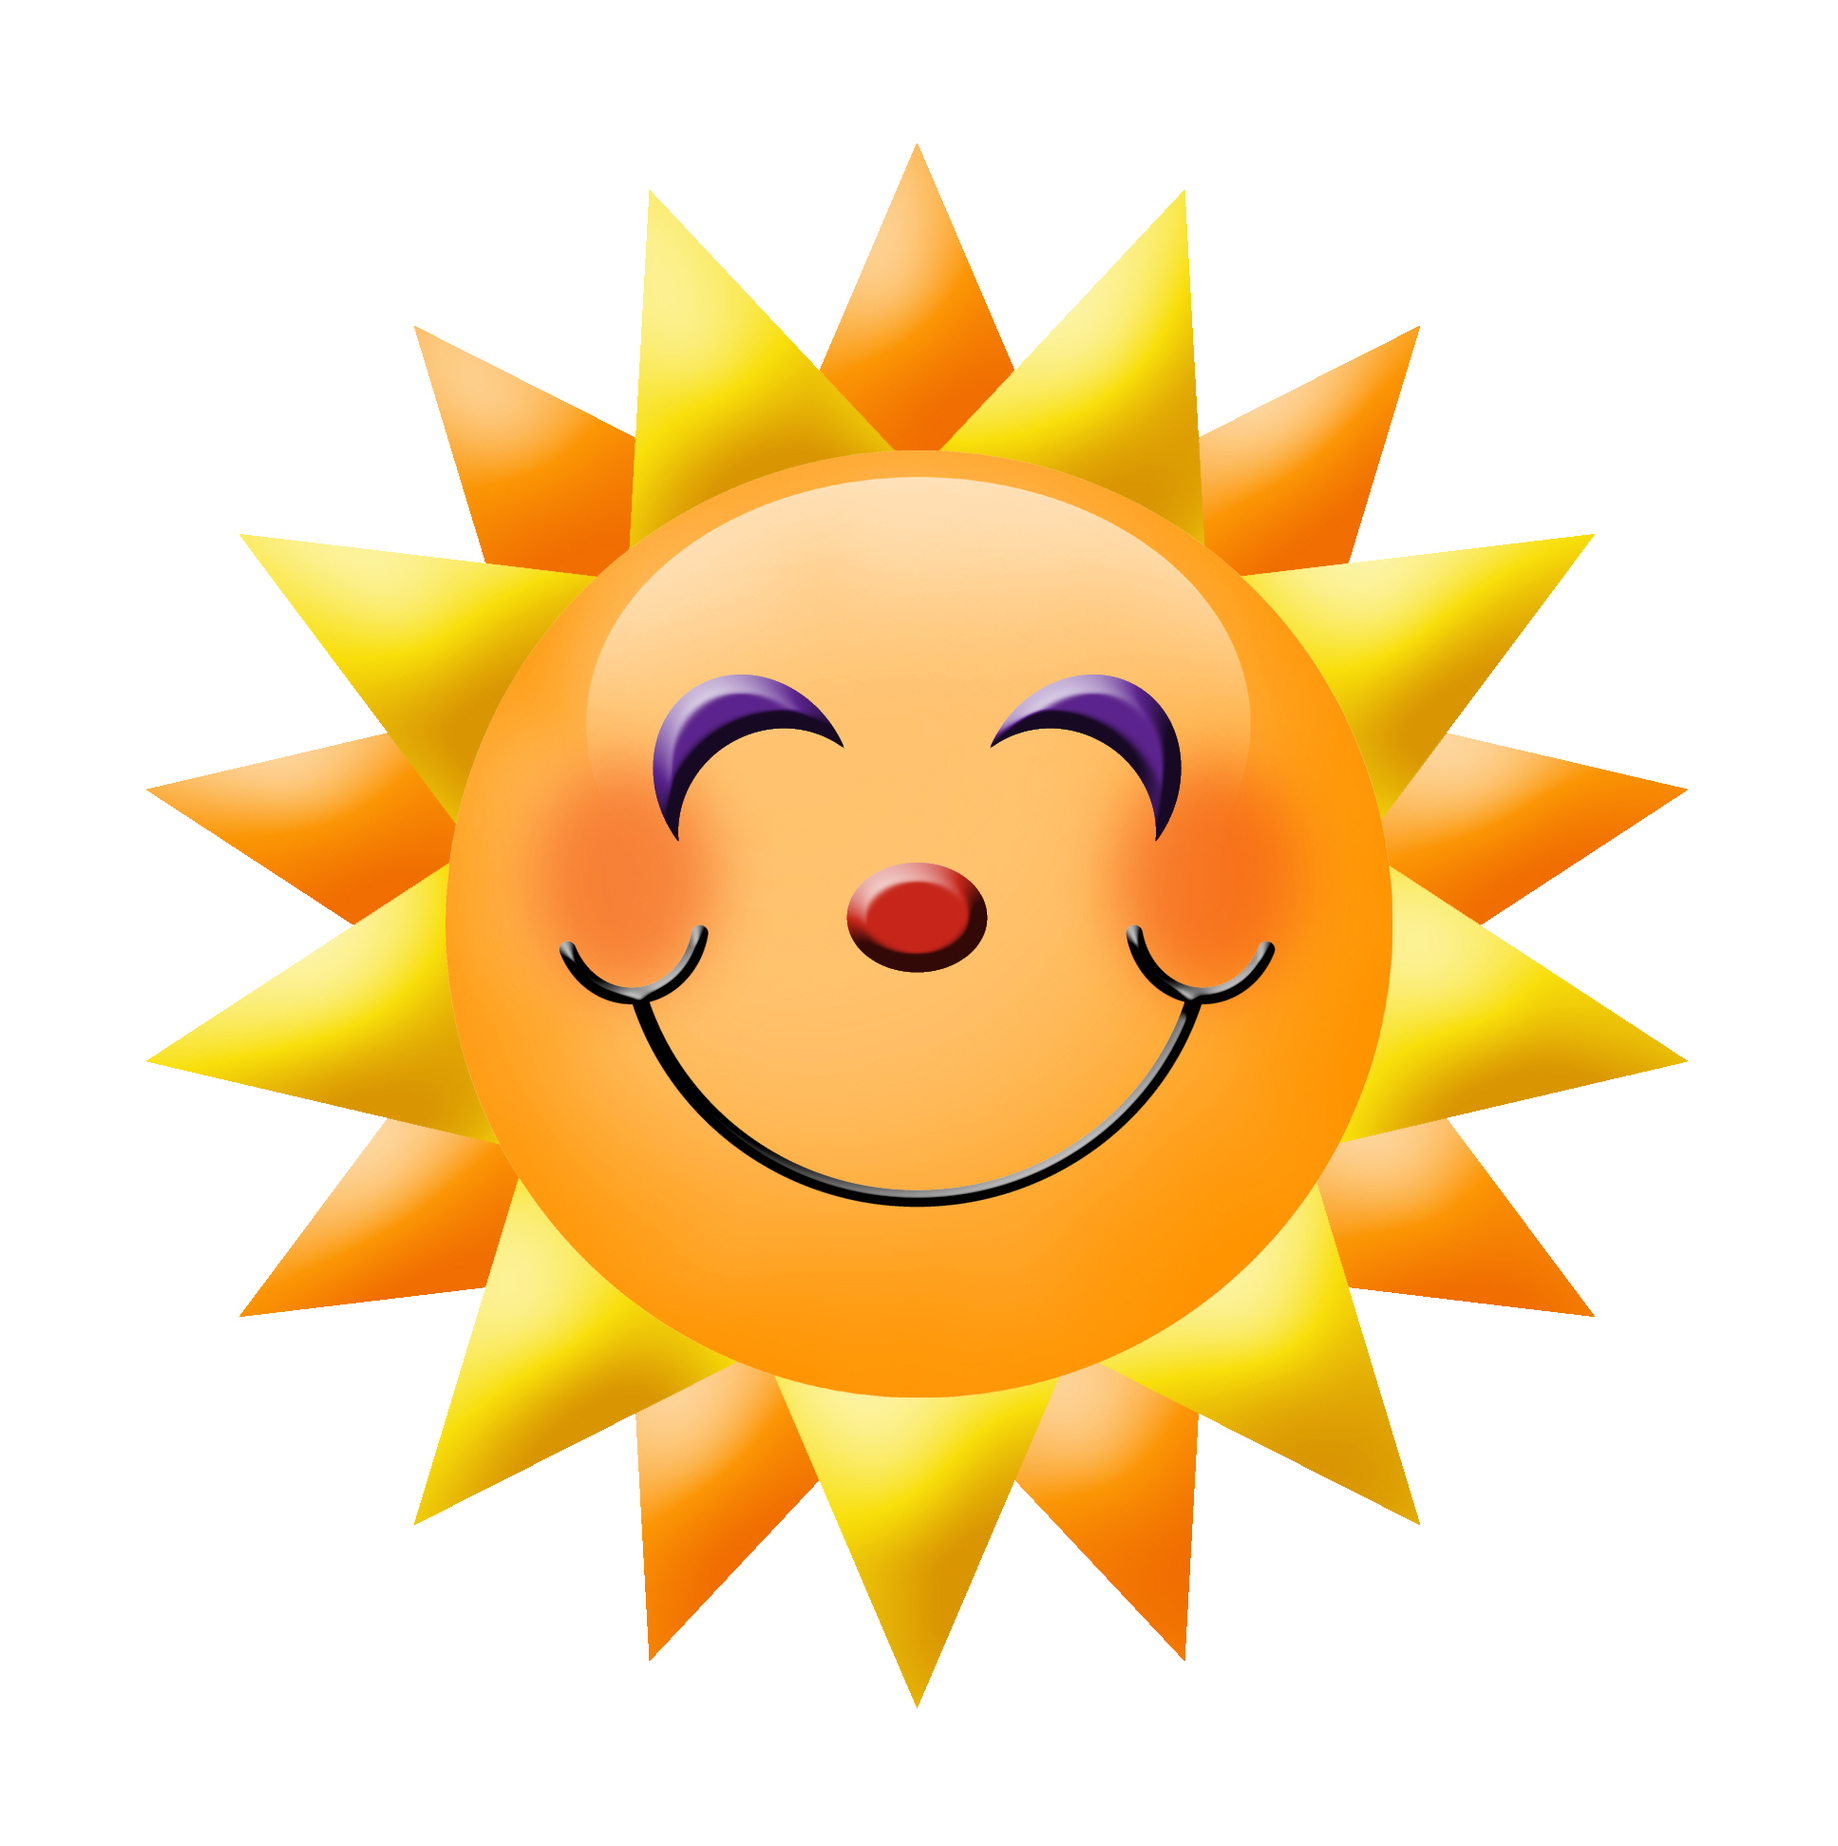 Animated Smiling Sun Clipart - Free to use Clip Art Resource